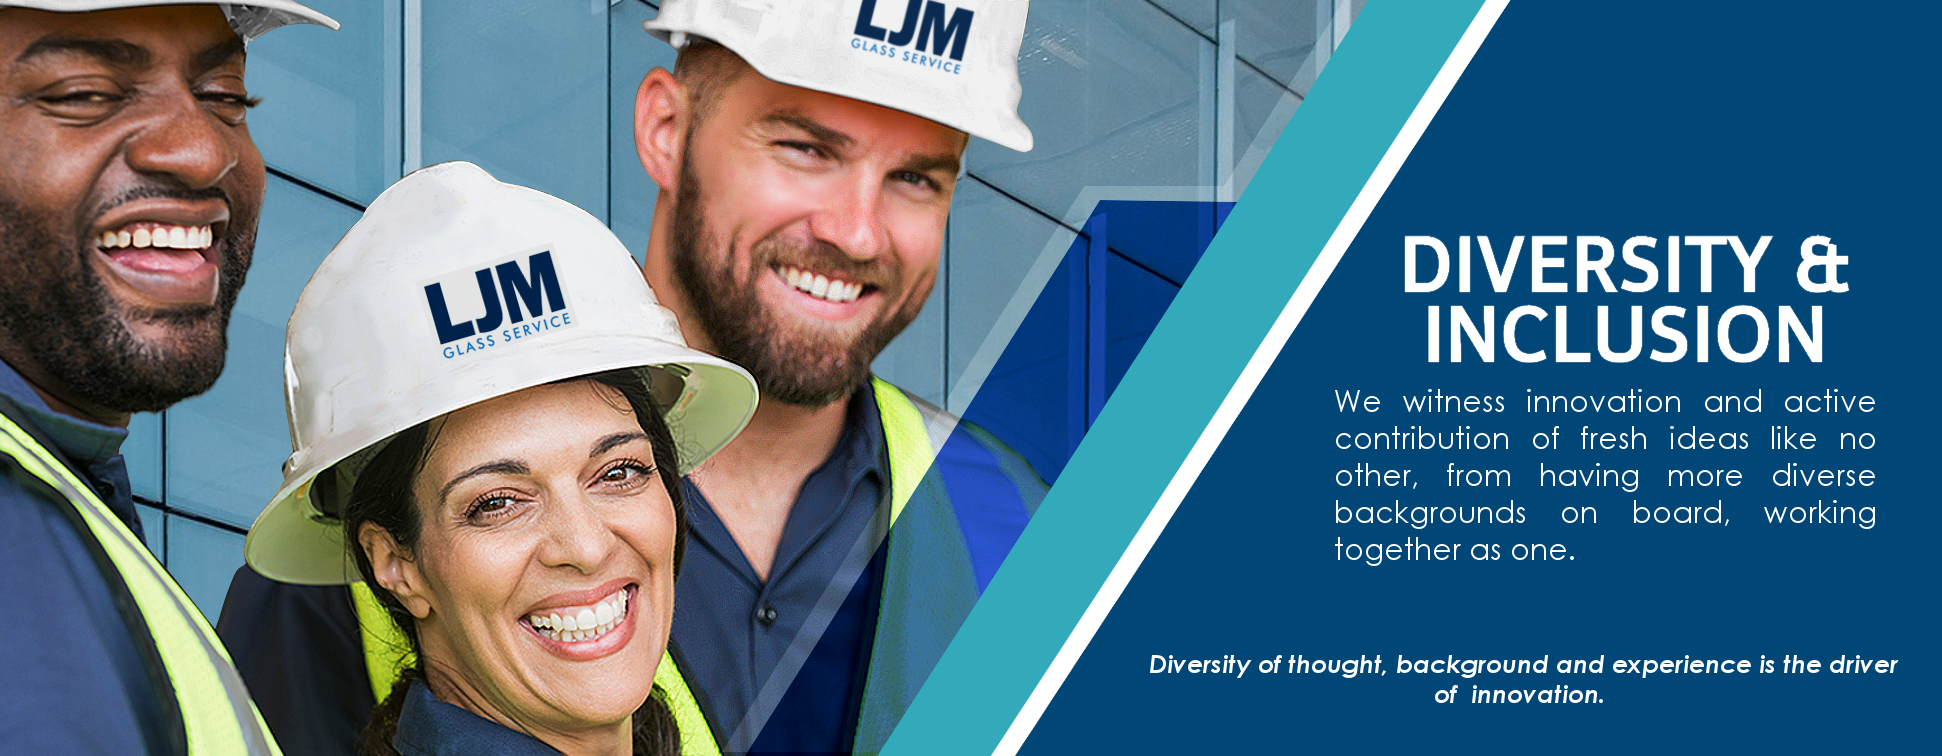 Commercial Glazing Labor Subcontractor - Diversity and Inclusion